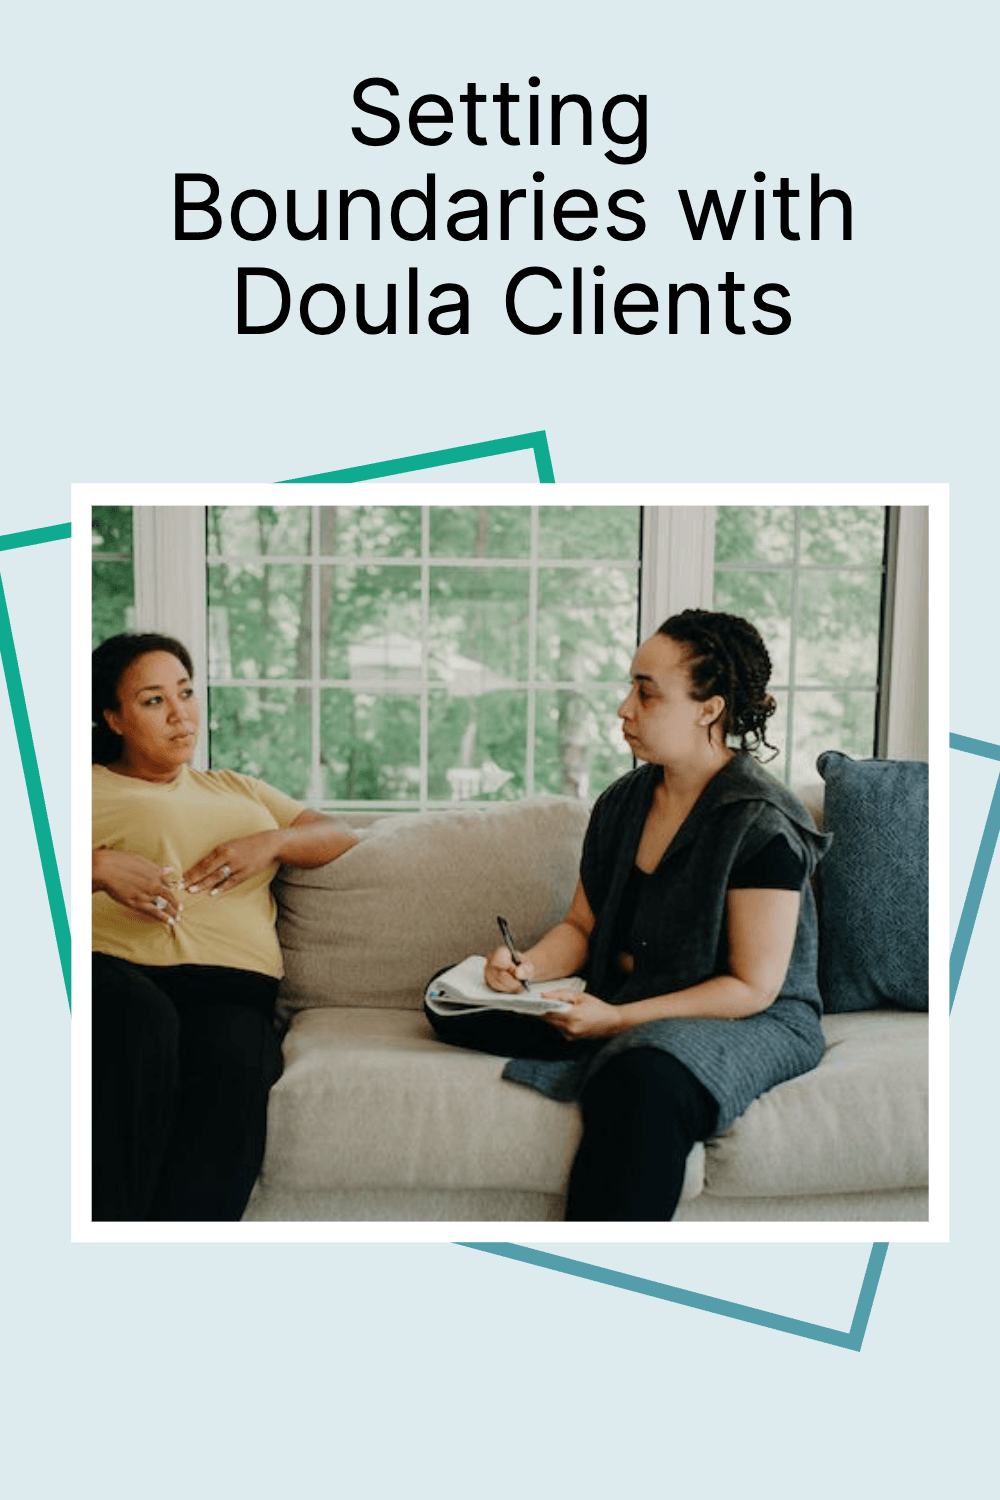 A doula and client sitting on a couch discussing boundaries in their relationship.